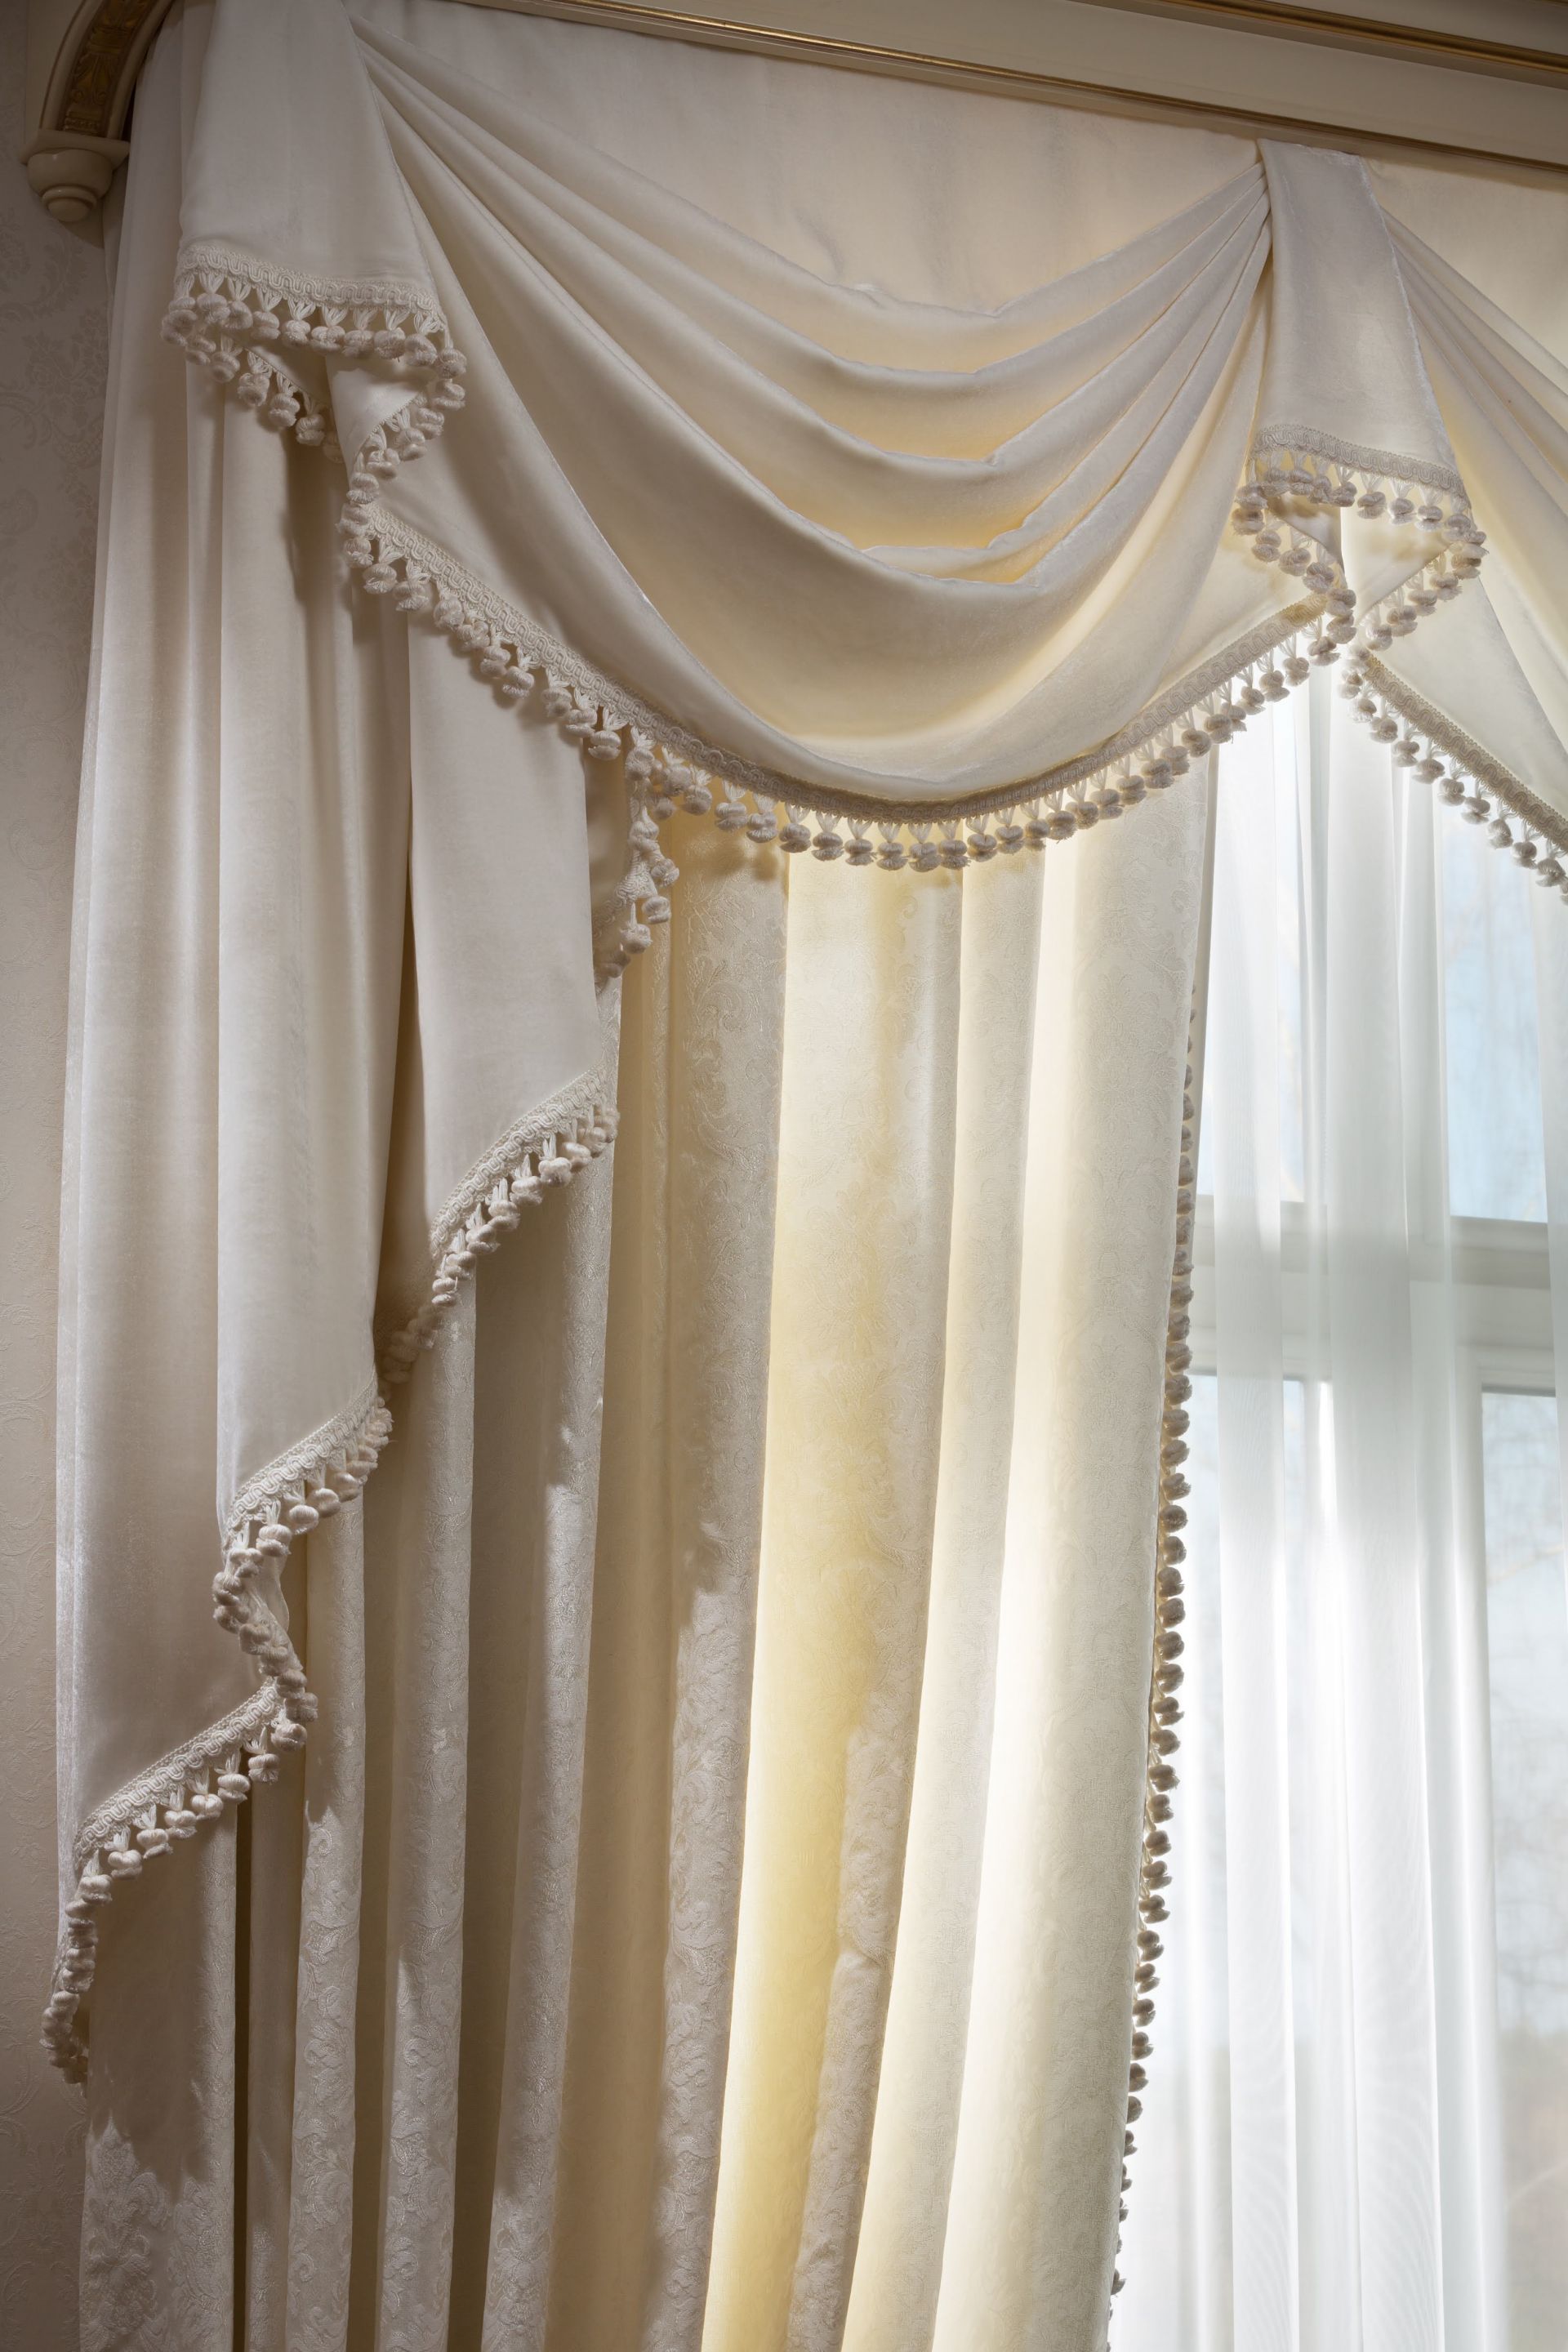 Curtains in an interior